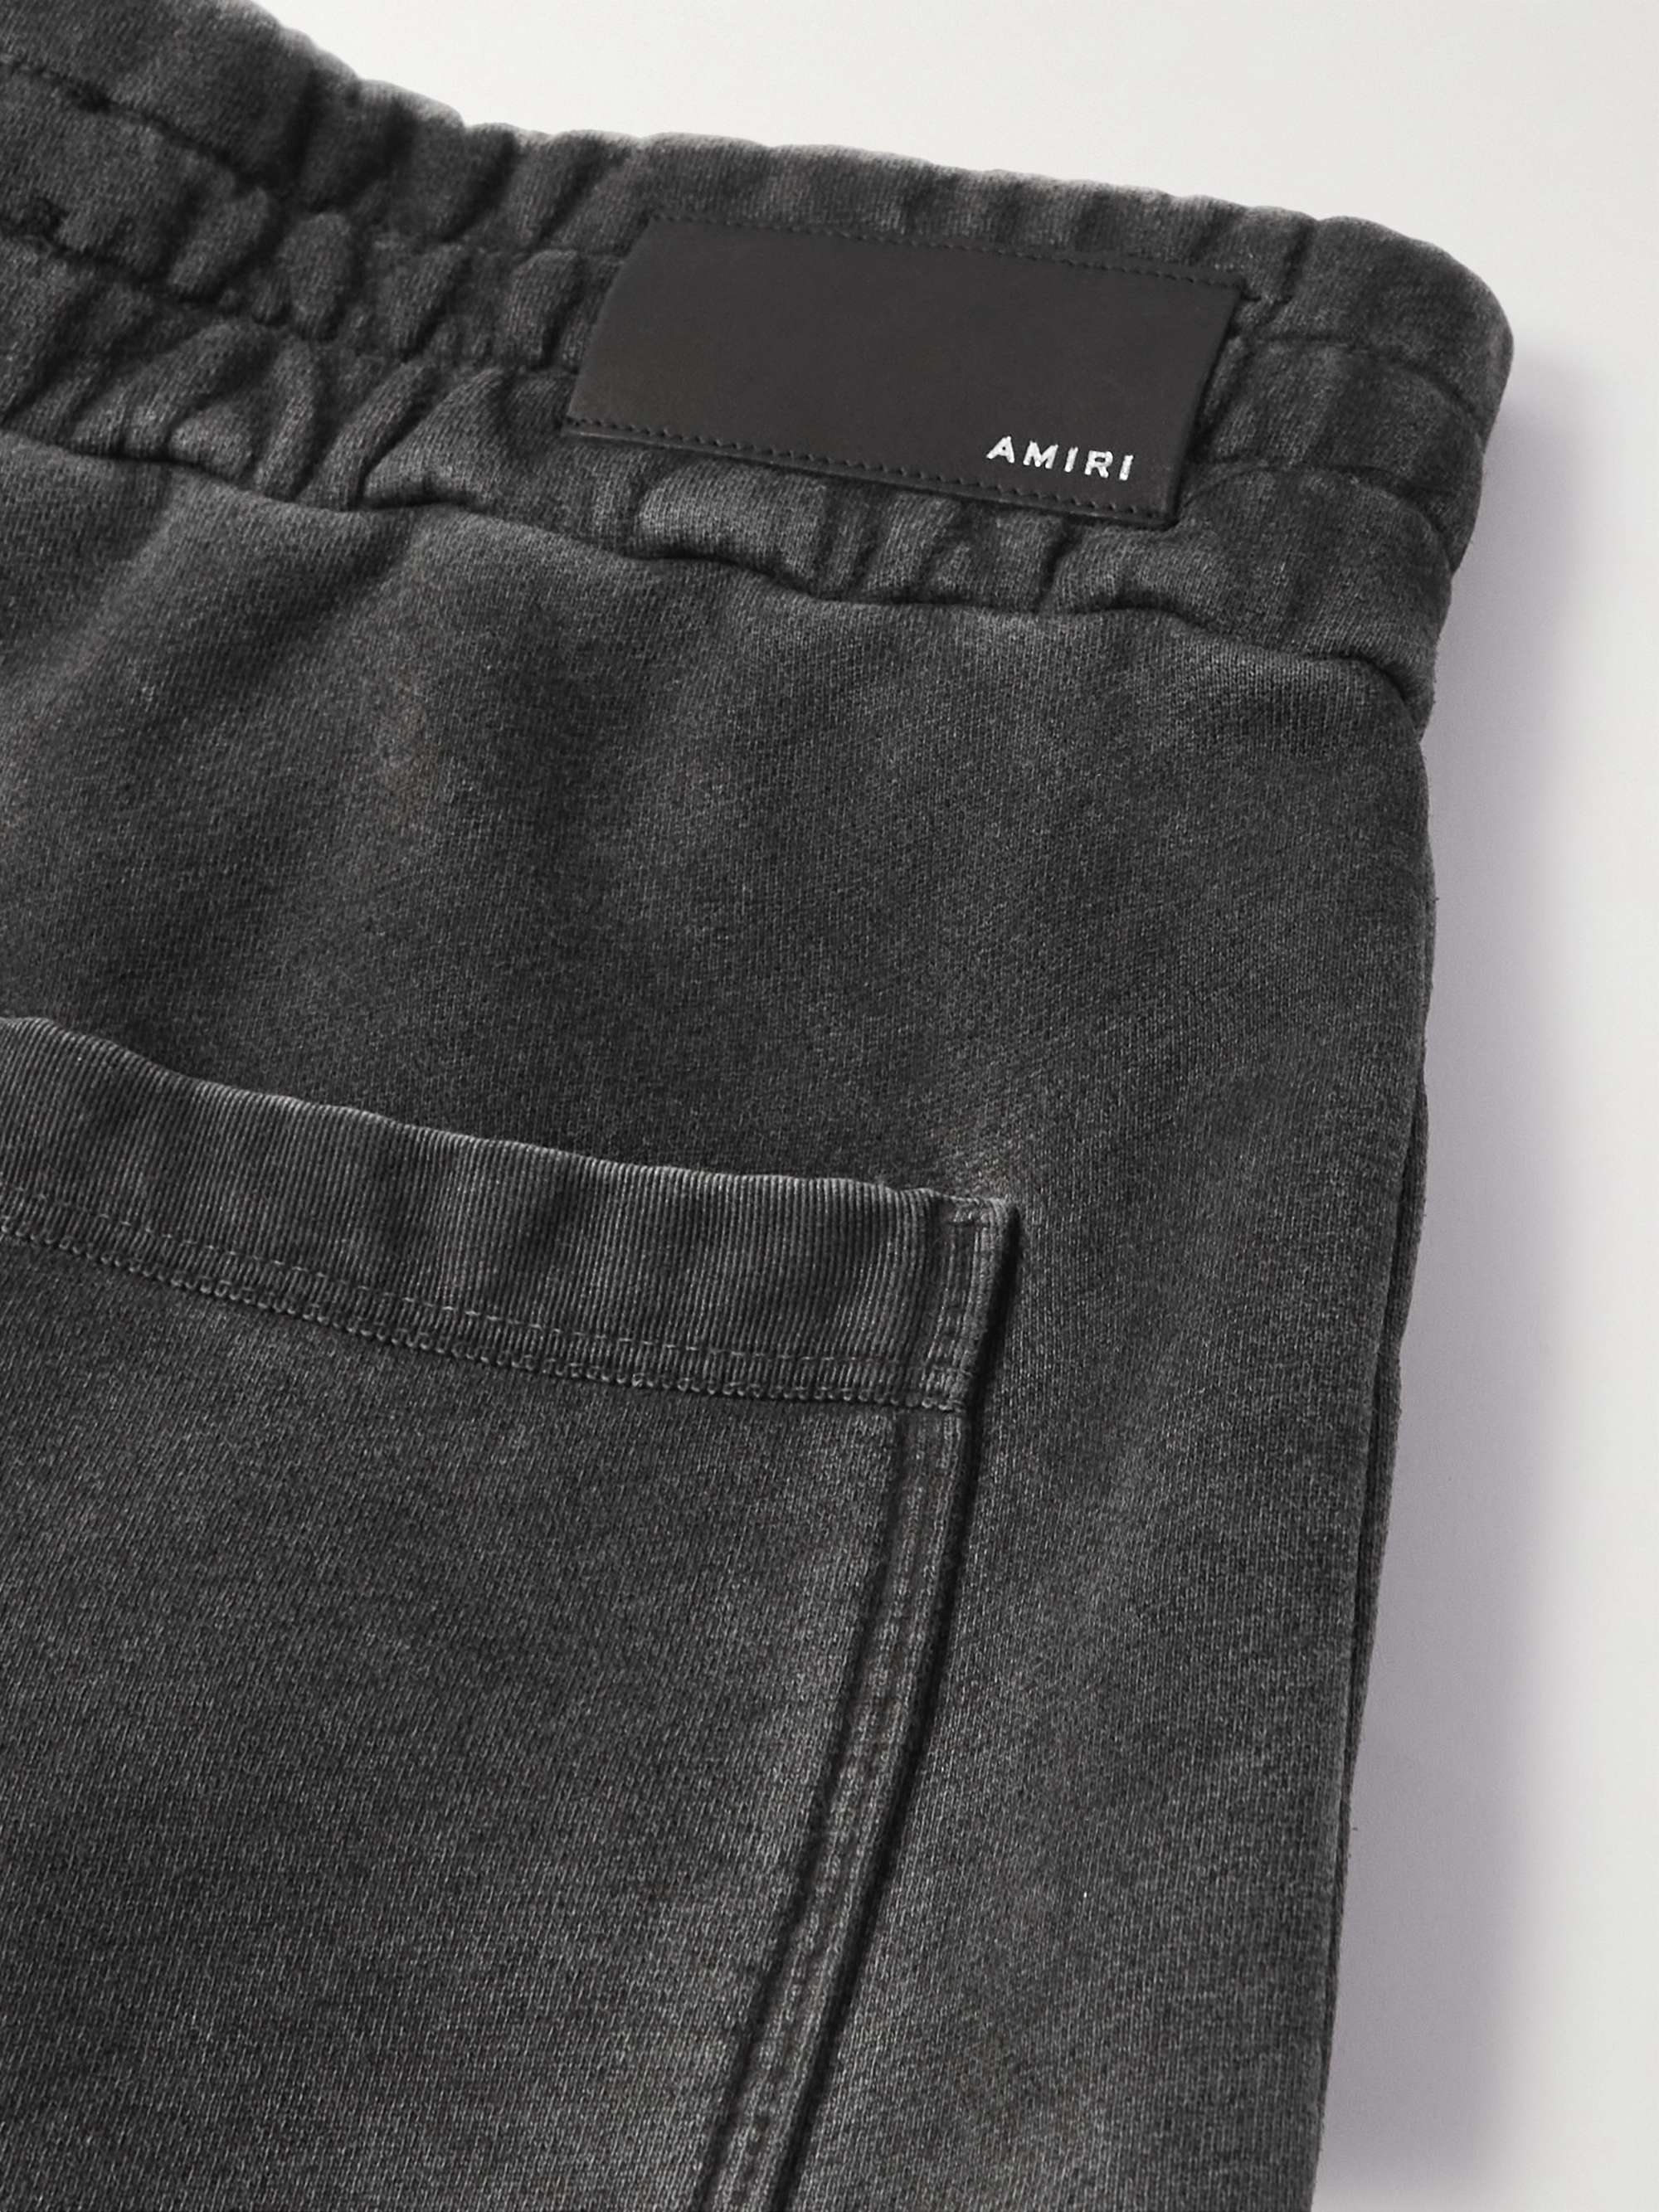 AMIRI Pigment Spray Star Tapered Leather-Trimmed Cotton-Jersey Sweatpants